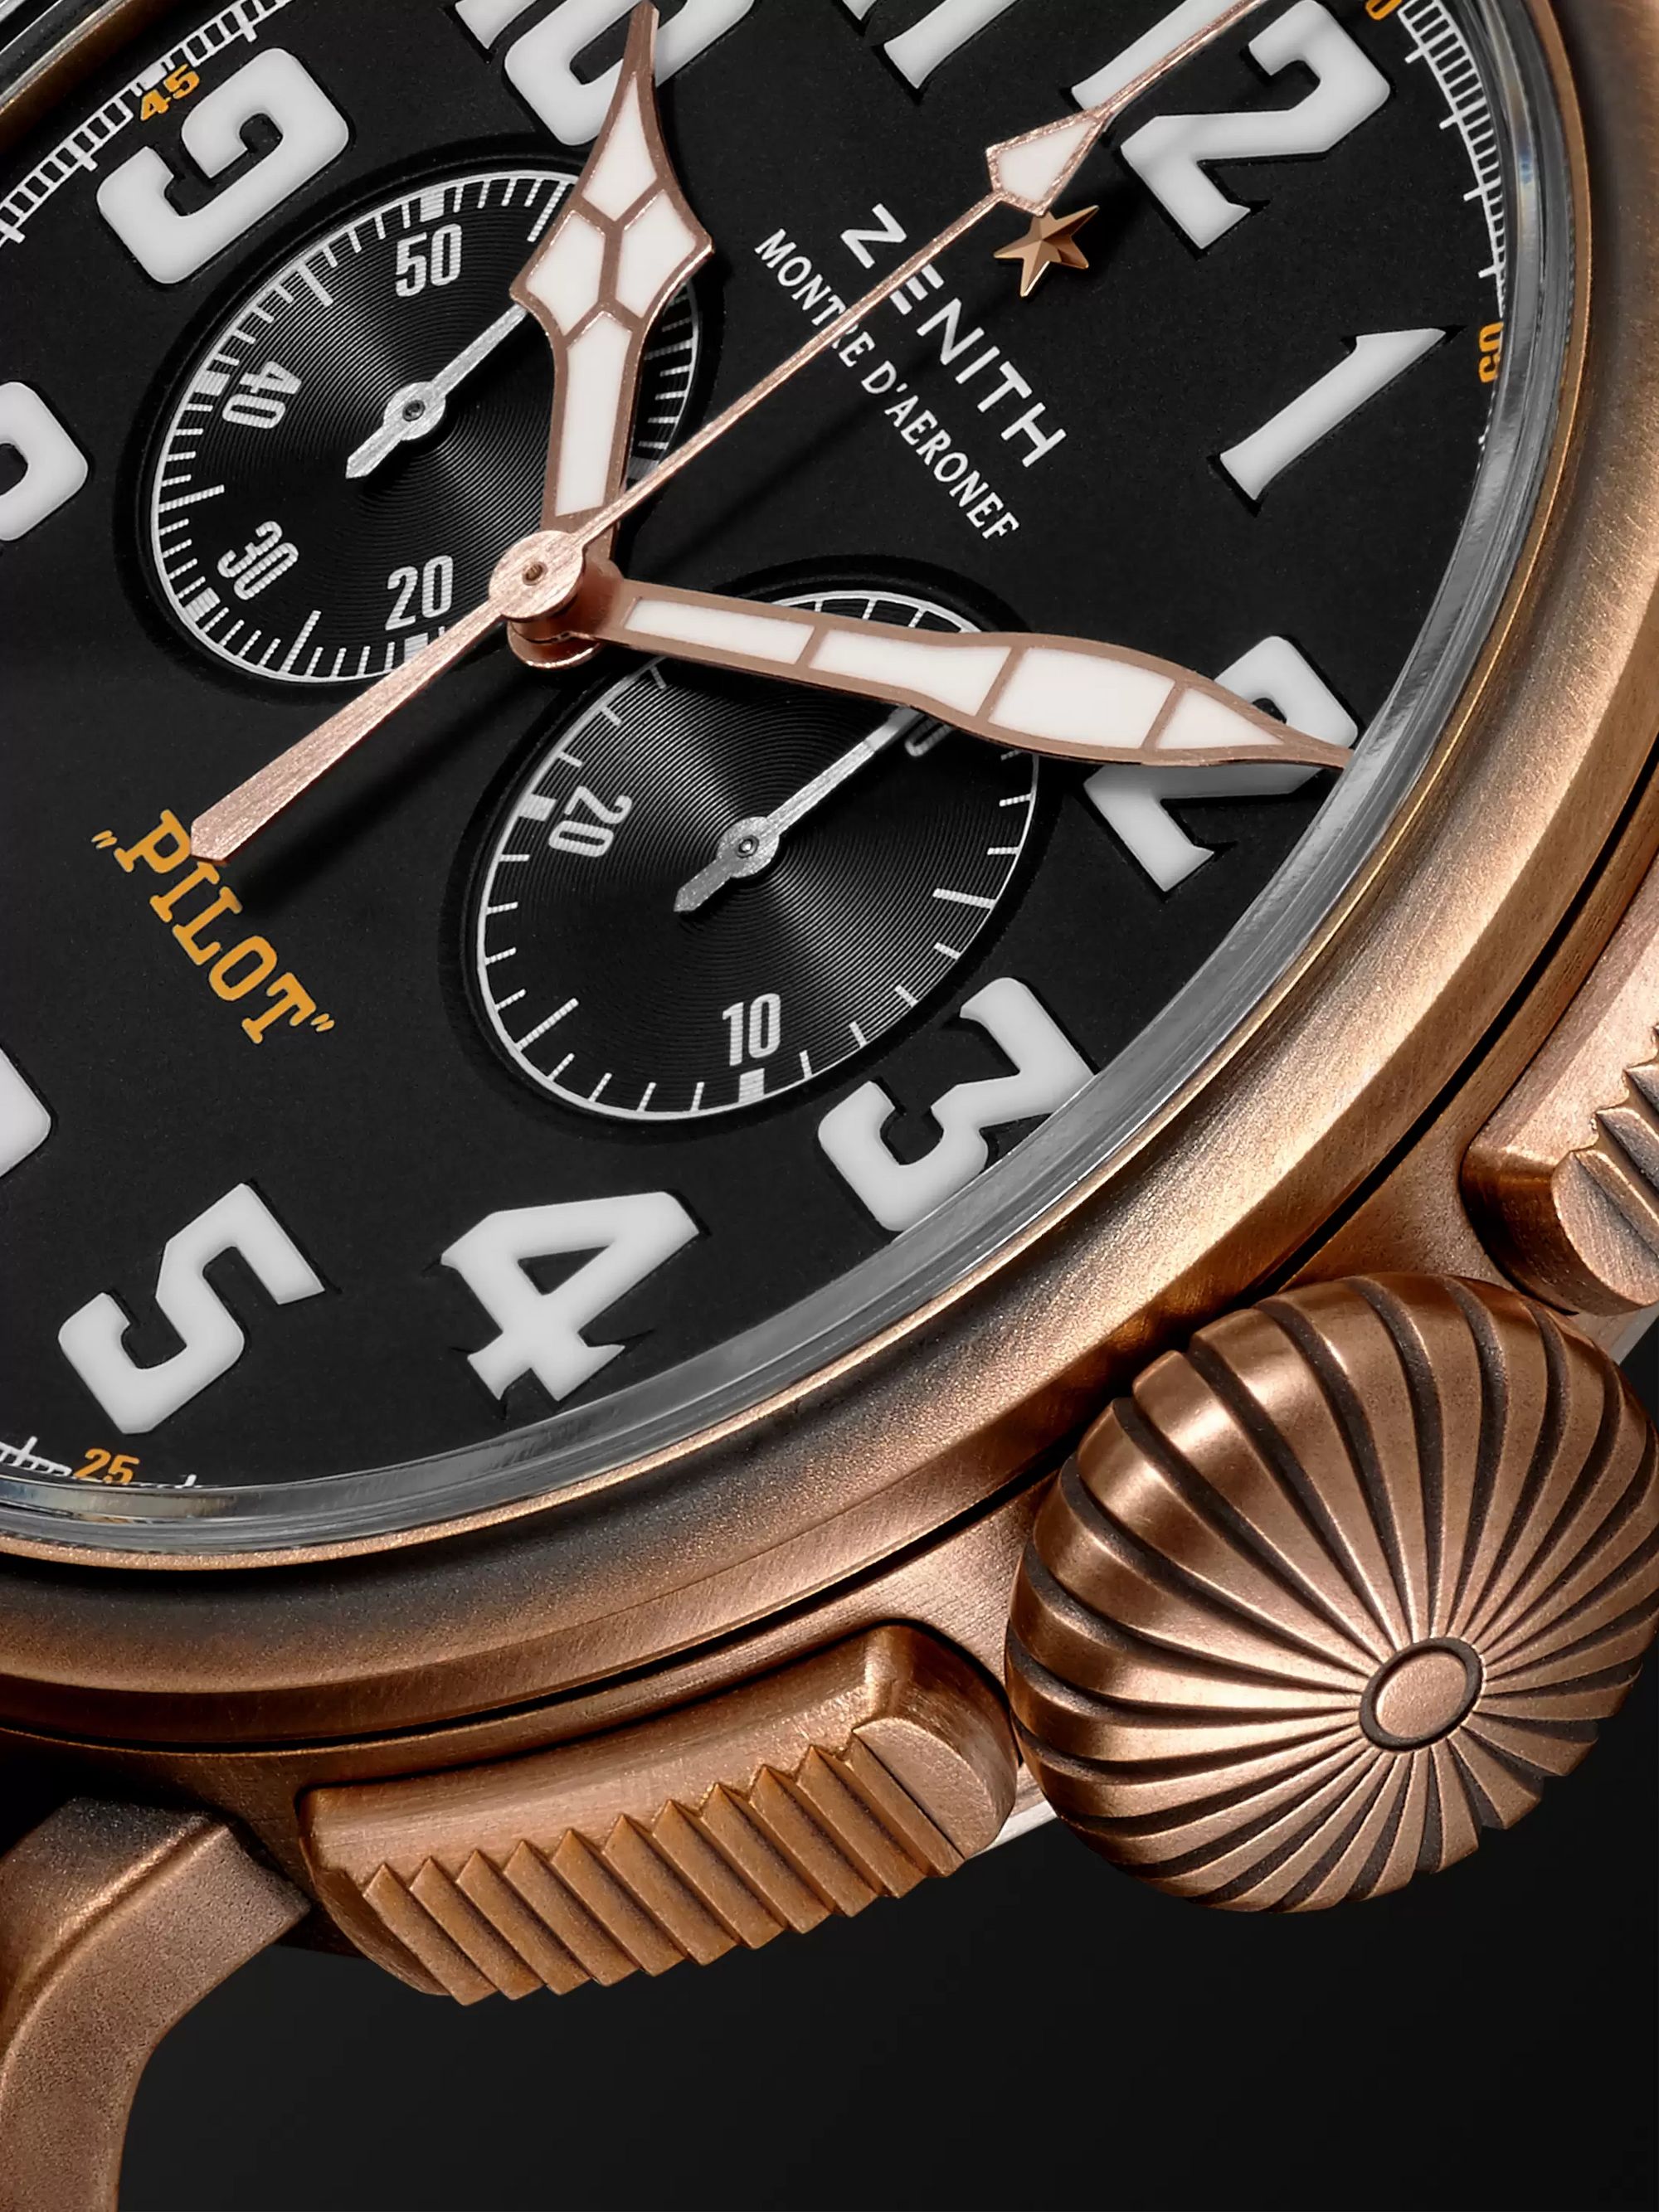 ZENITH Pilot Type 20 Extra Special Automatic Chronograph 45mm Bronze and Nubuck Watch, Ref. No. 29.2430.4069/21.C800